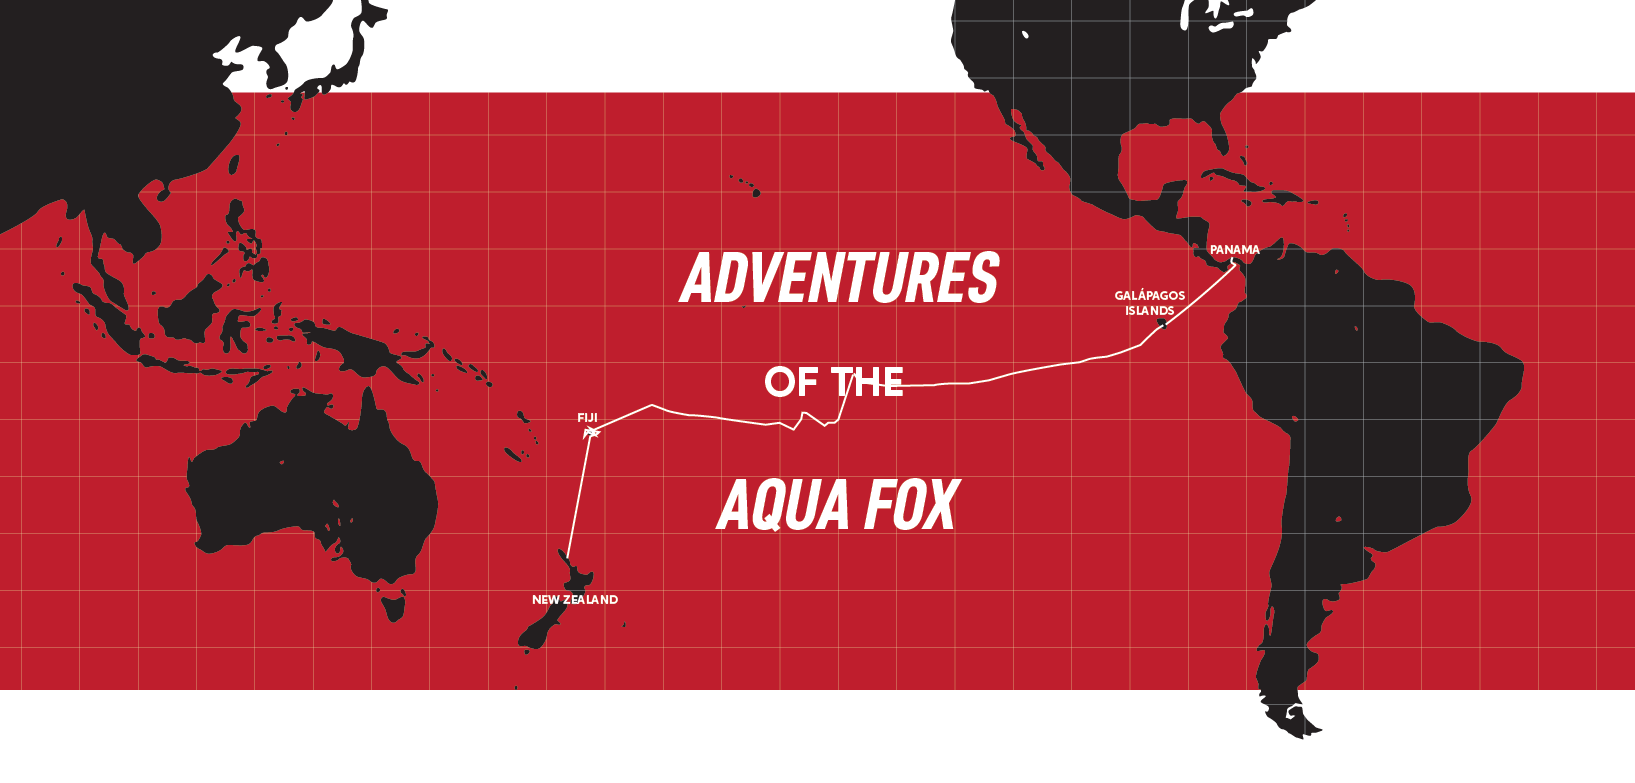 Adventures of the Aqua Fox route map planning ahead full trip length. Grid Map